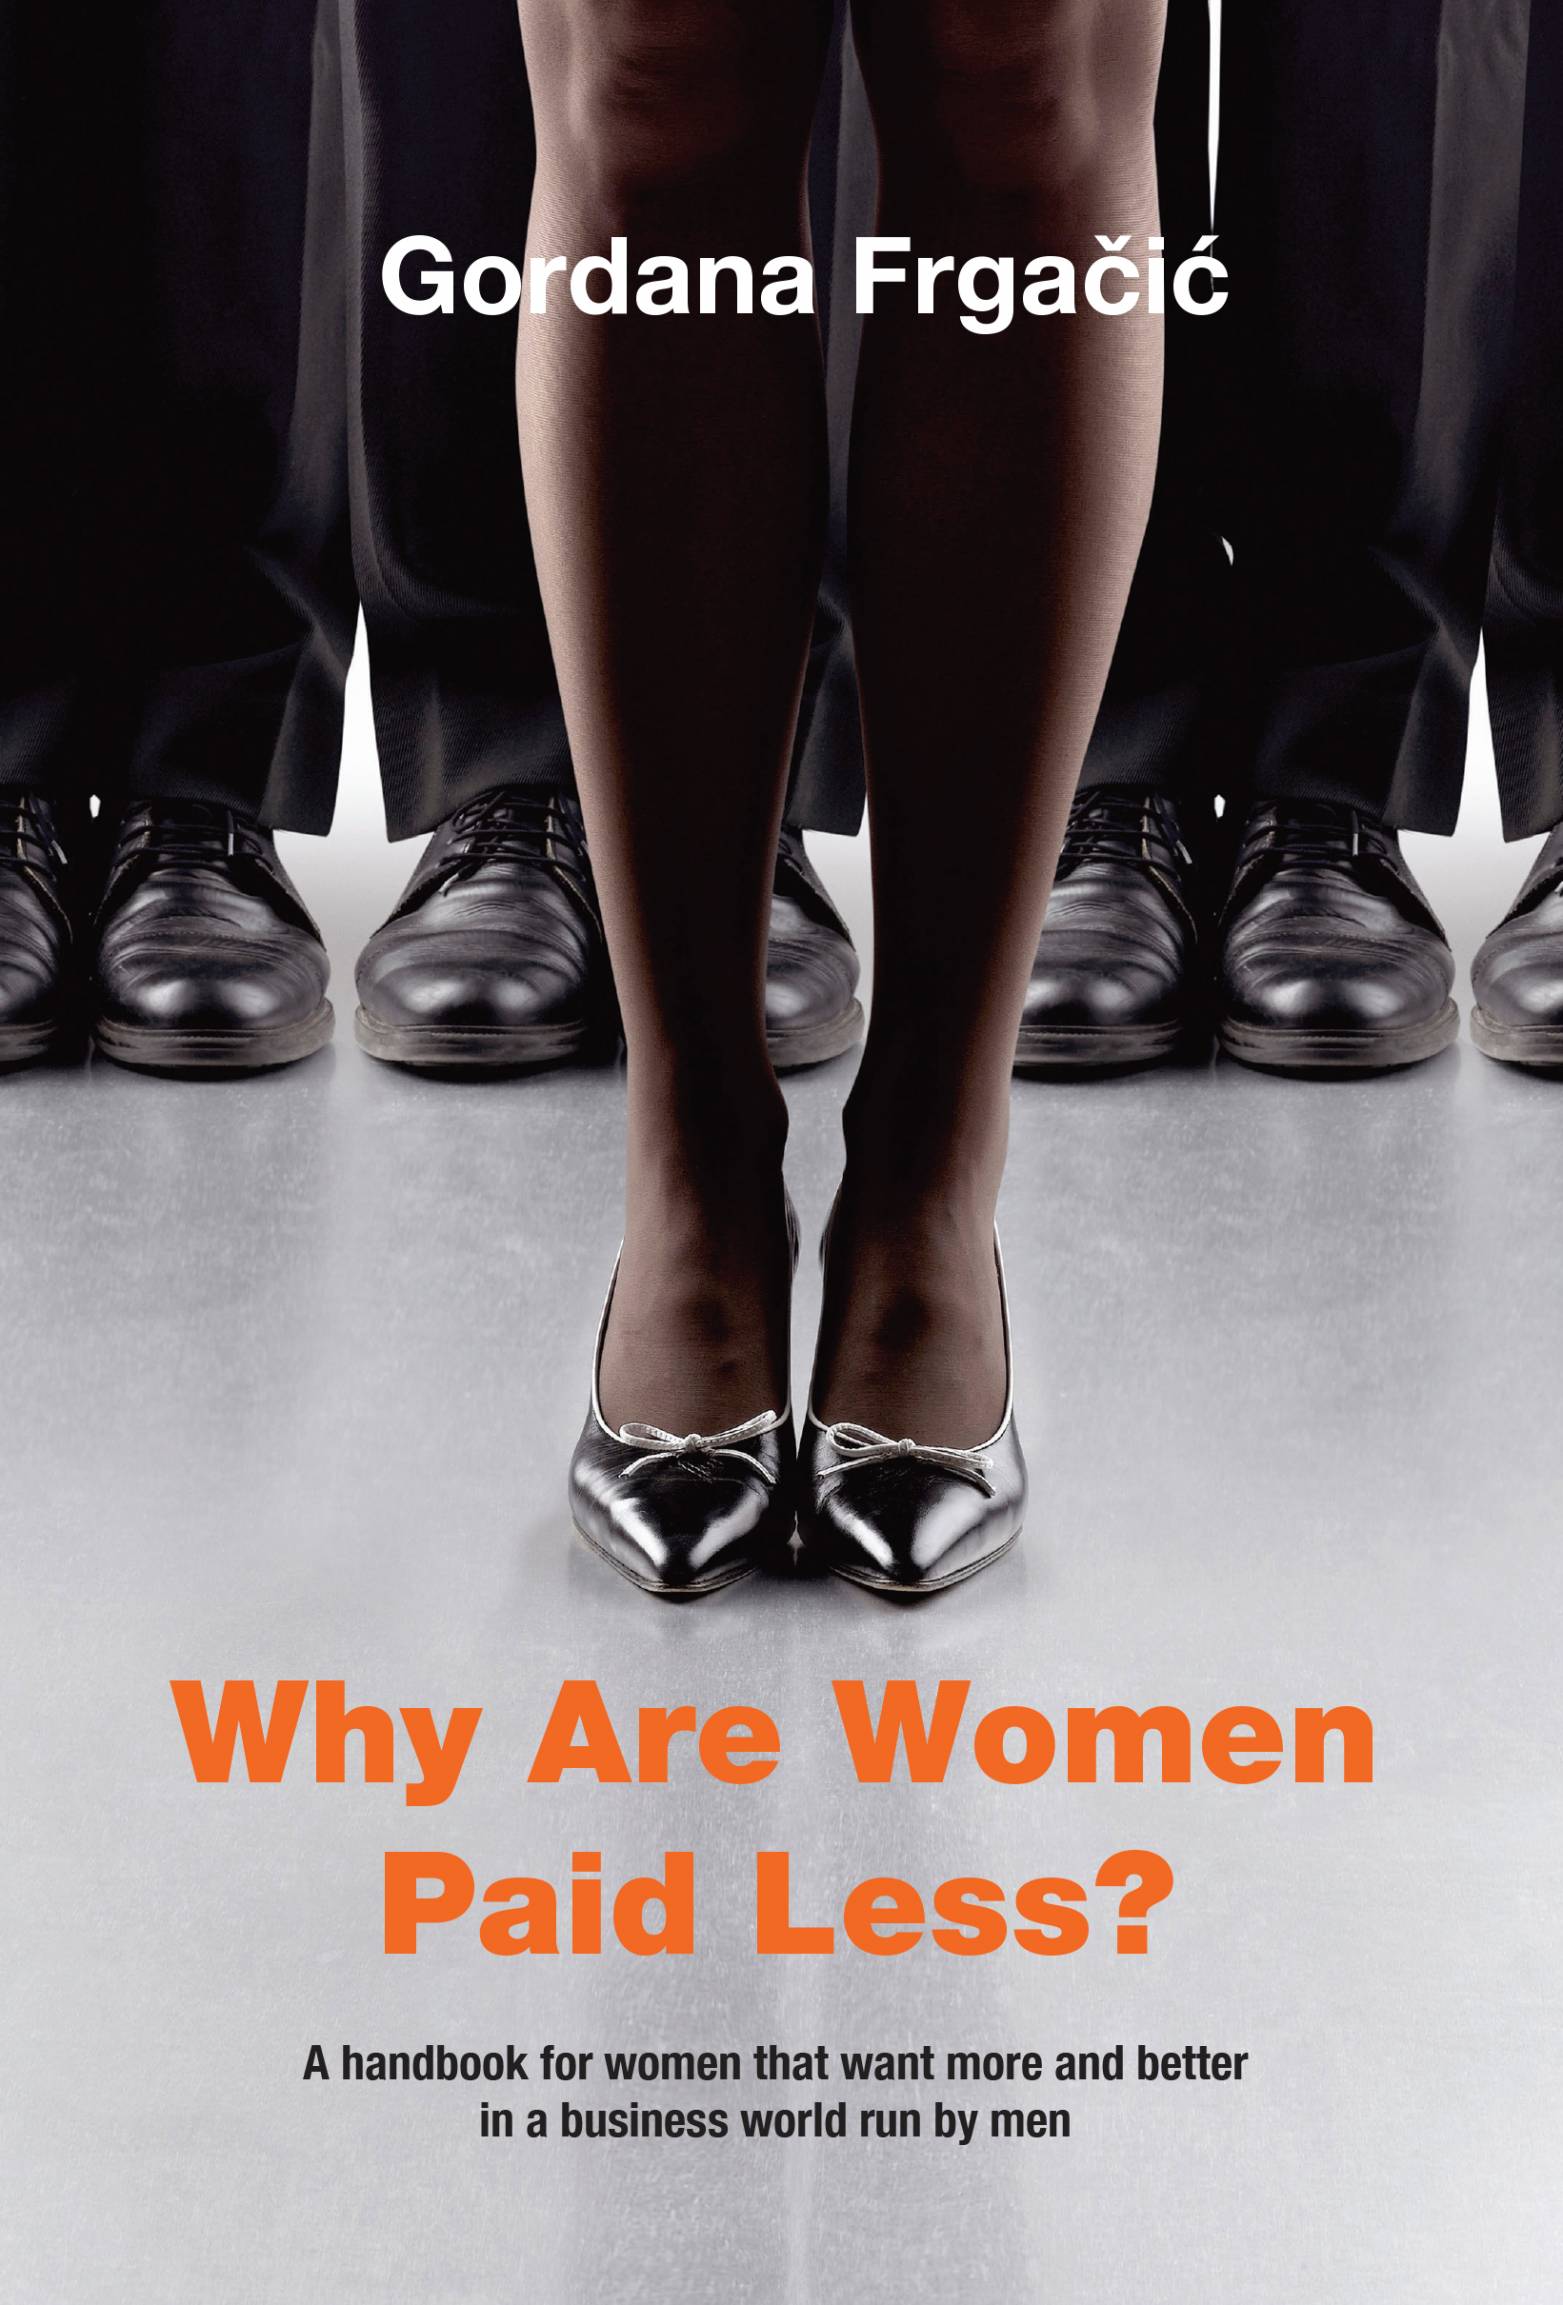 Why Are Women Paid Less?